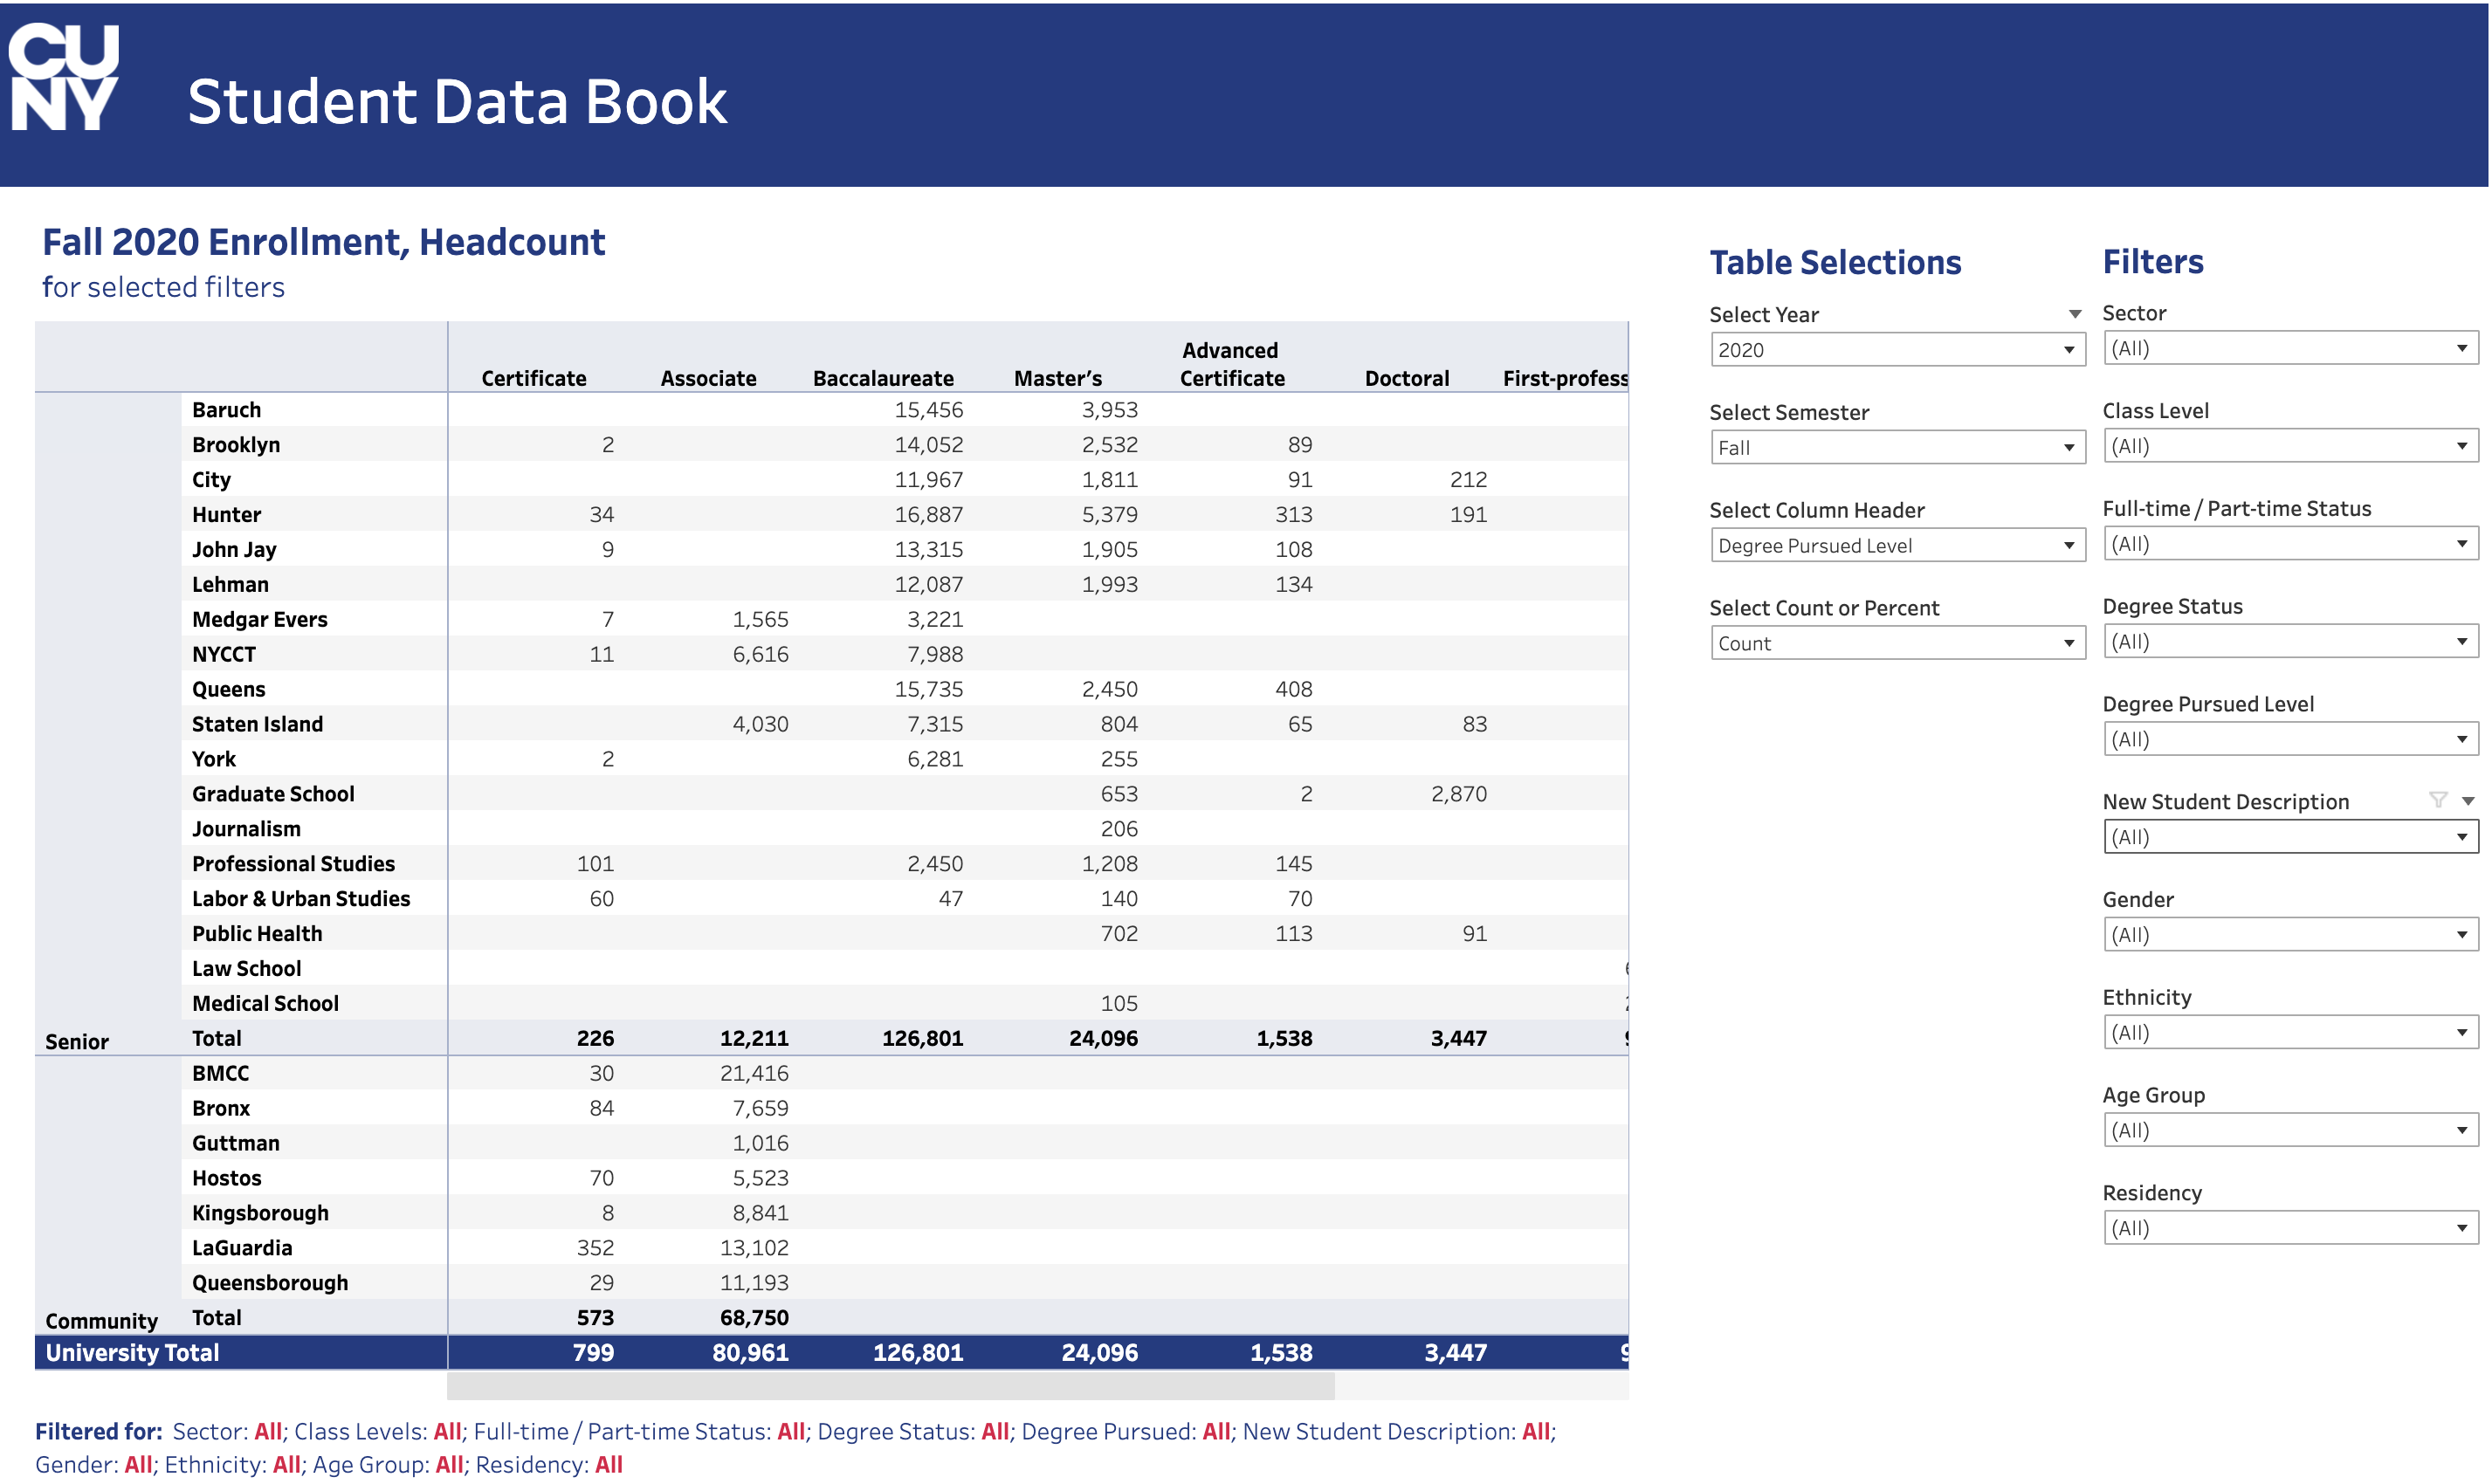 CUNY STUDENT DATA BOOK